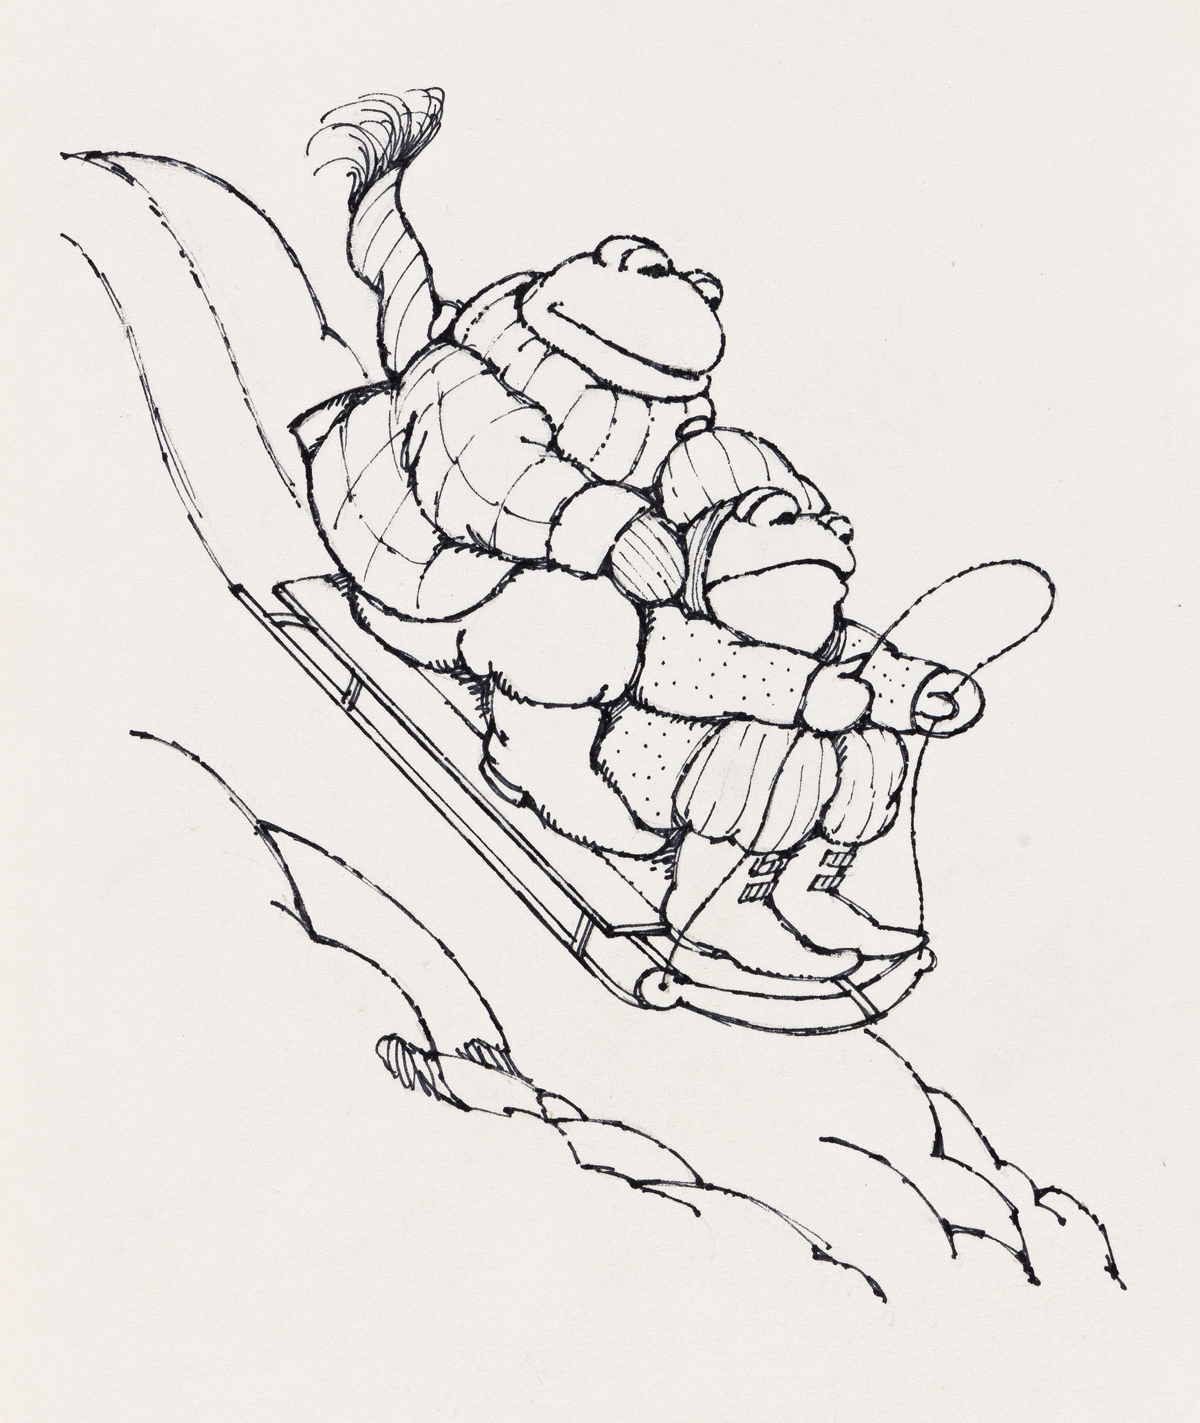 ARNOLD LOBEL (1933-1987) The sled began to move down the hill. [CHILDRENS]